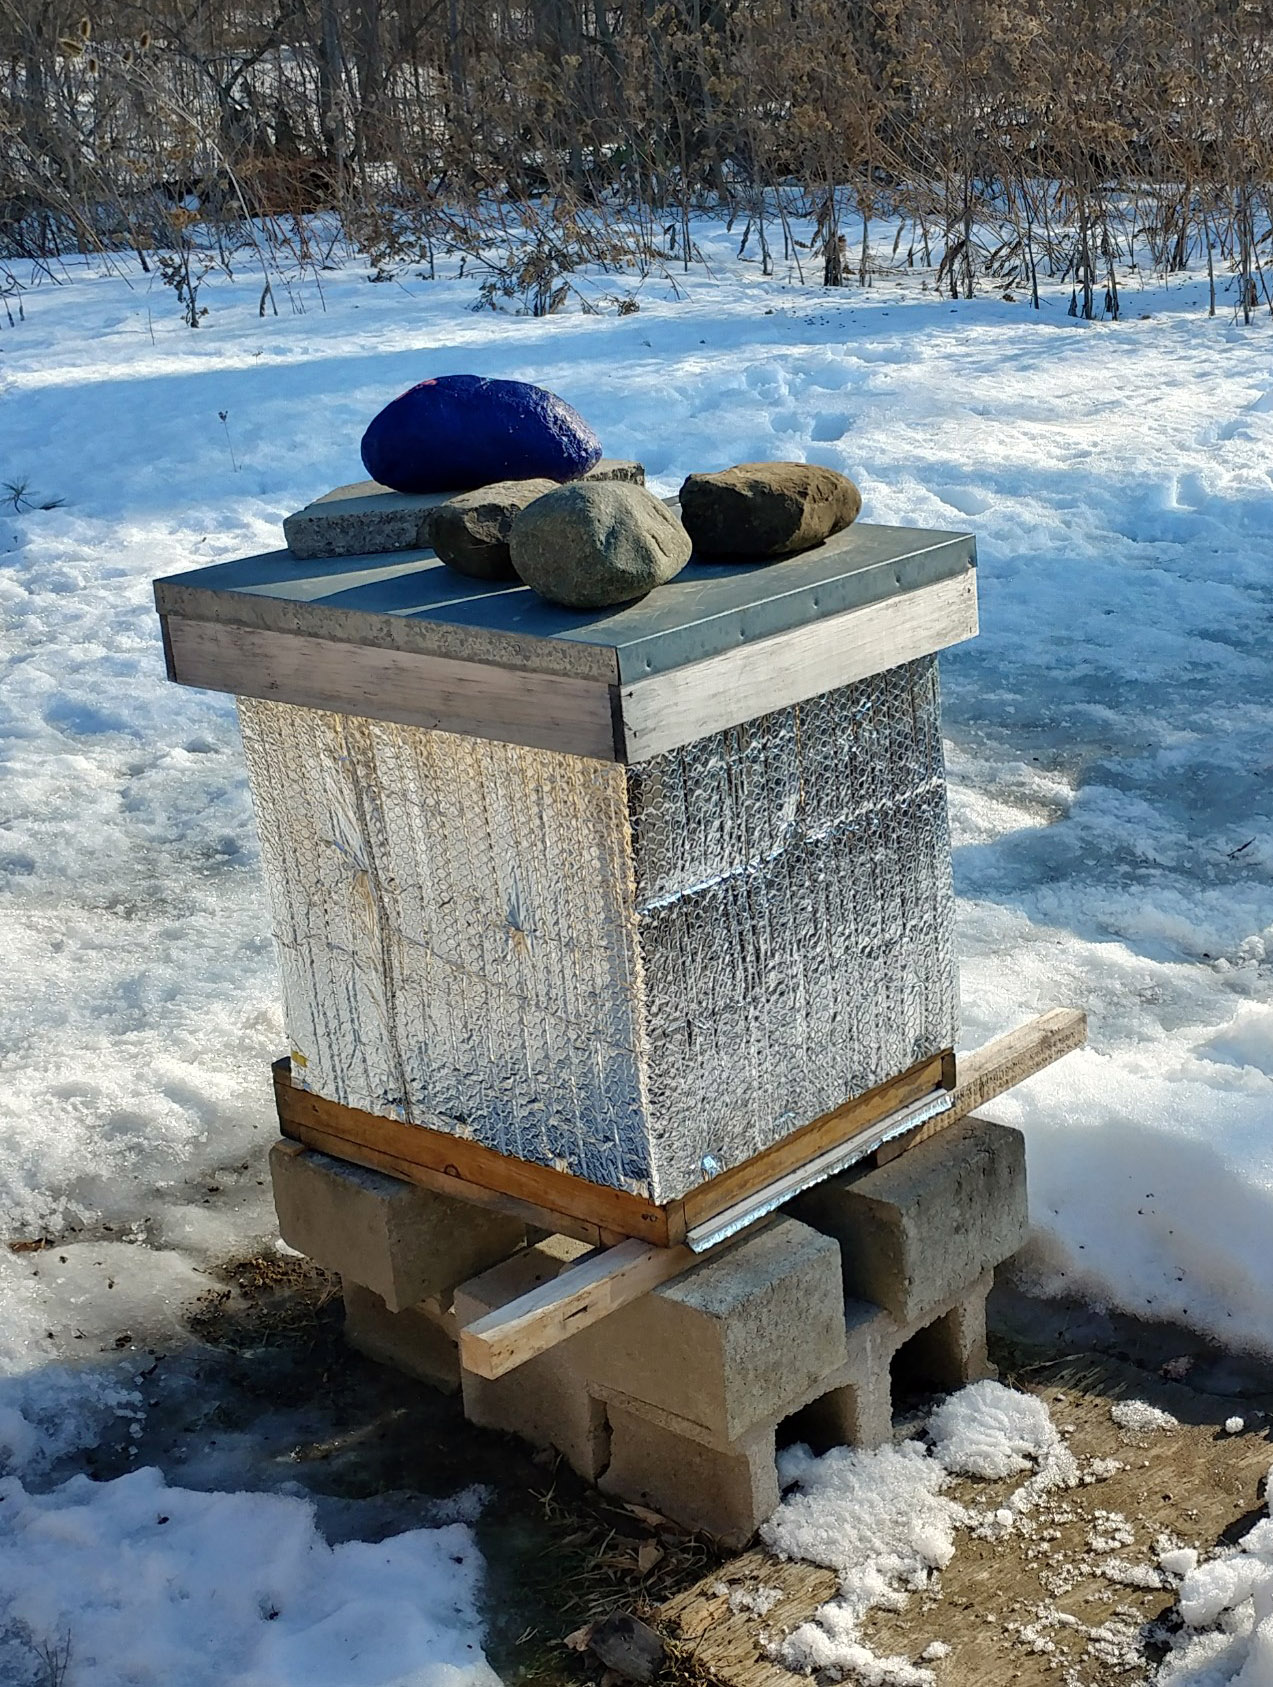 Hive in winter with snow around